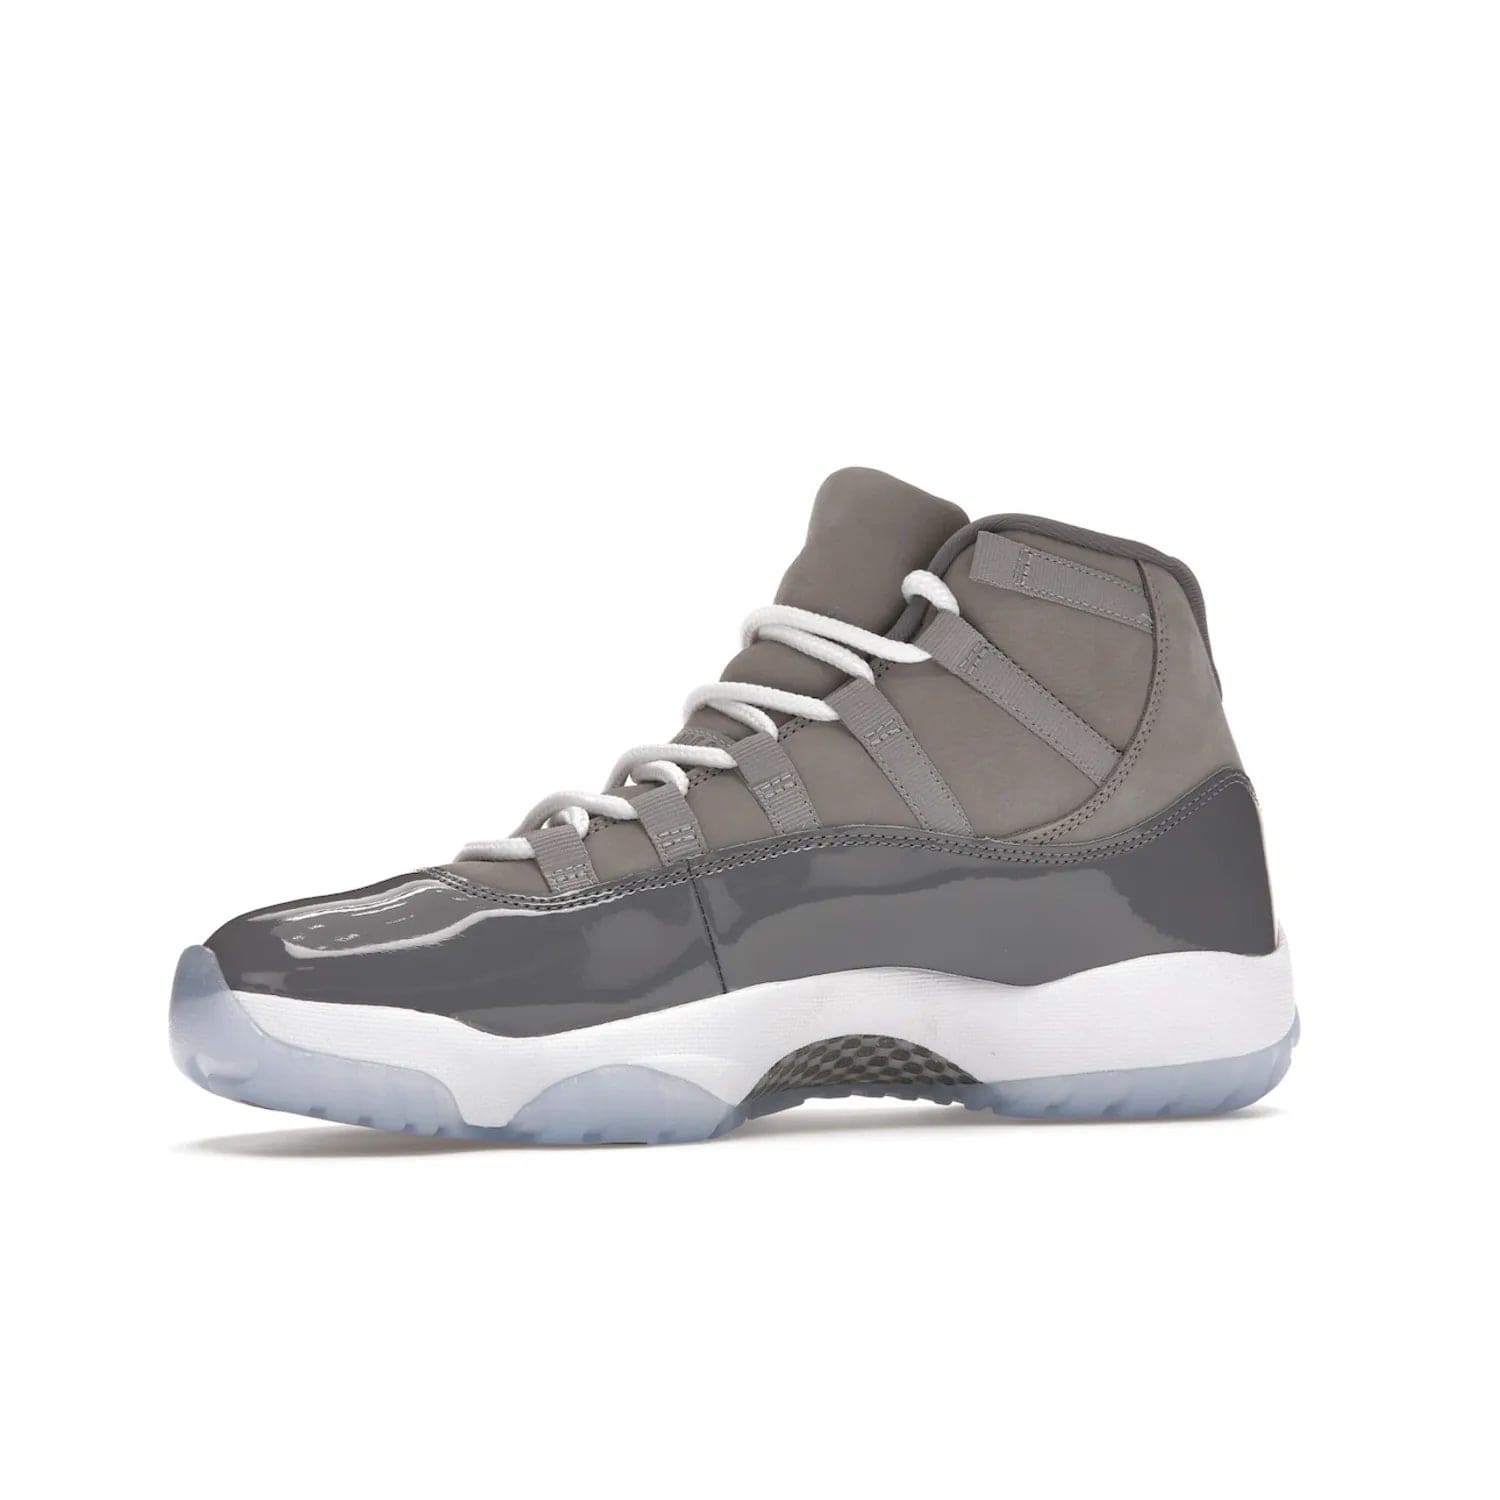 Jordan 11 Retro Cool Grey (2021) - Image 17 - Only at www.BallersClubKickz.com - Shop the Air Jordan 11 Retro Cool Grey (2021) for a must-have sneaker with a Cool Grey Durabuck upper, patent leather overlays, signature Jumpman embroidery, a white midsole, icy blue translucent outsole, and Multi-Color accents.  Released in December 2021 for $225.